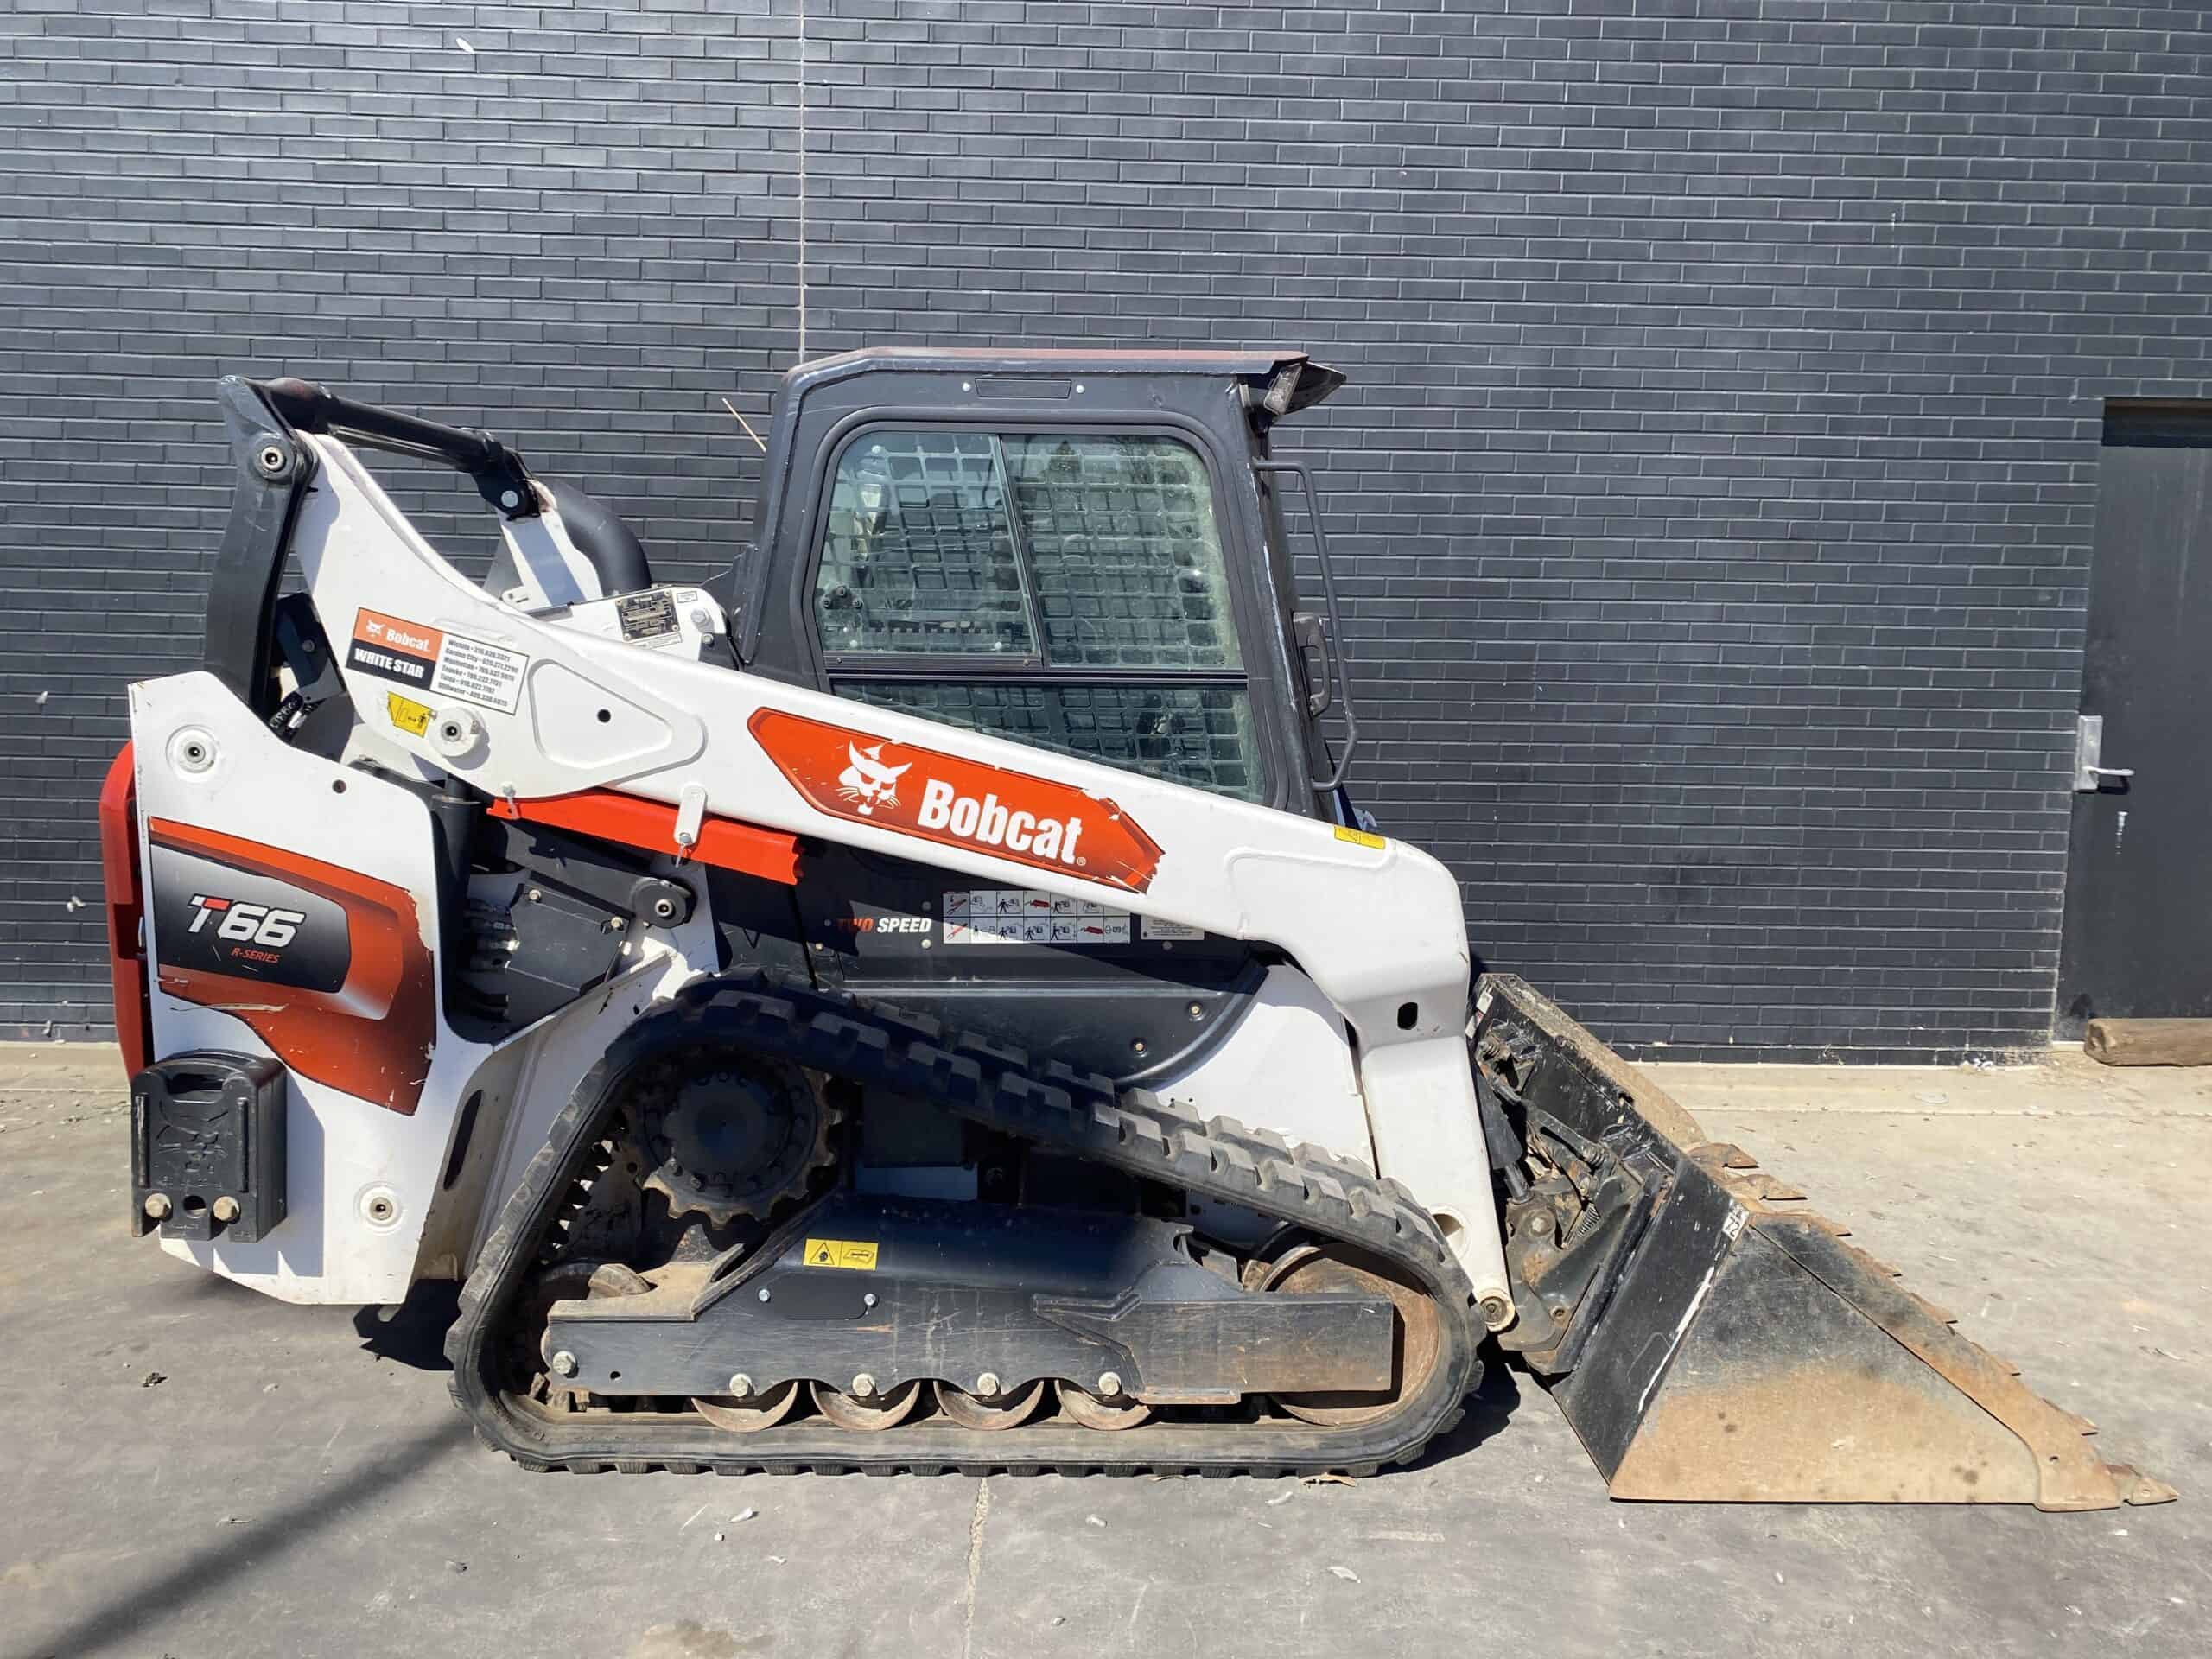 Buy a Used 2022 T66 BOBCAT COMPACT TRACK LOADER from White Star Machinery